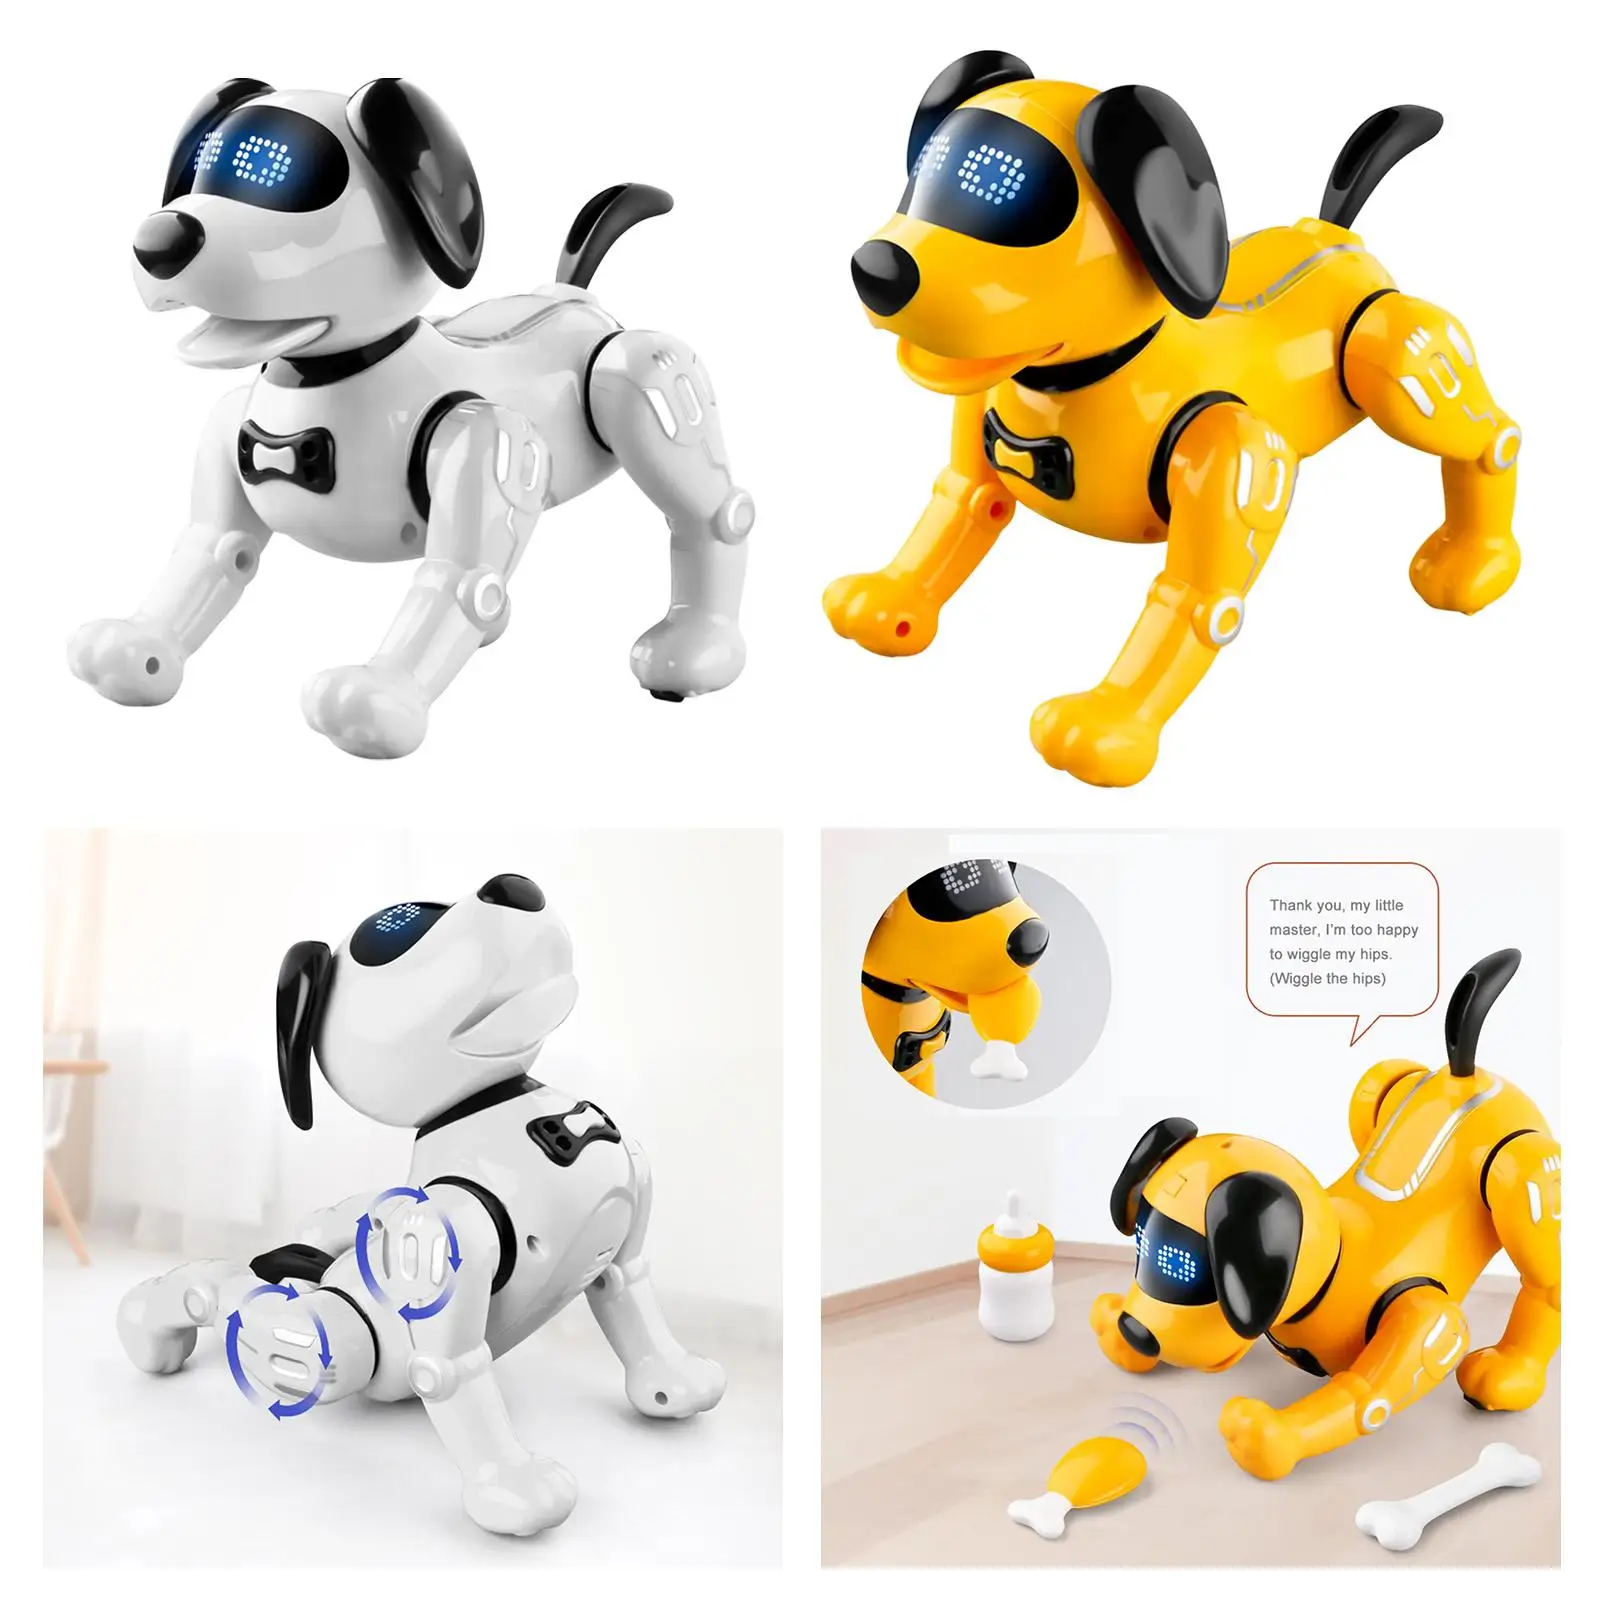 Remote Control Robot Dog toy cute smart Dancing robot Dog Toy Electronic Pet Stunt Puppy for Children Boys and Girls Toddlers